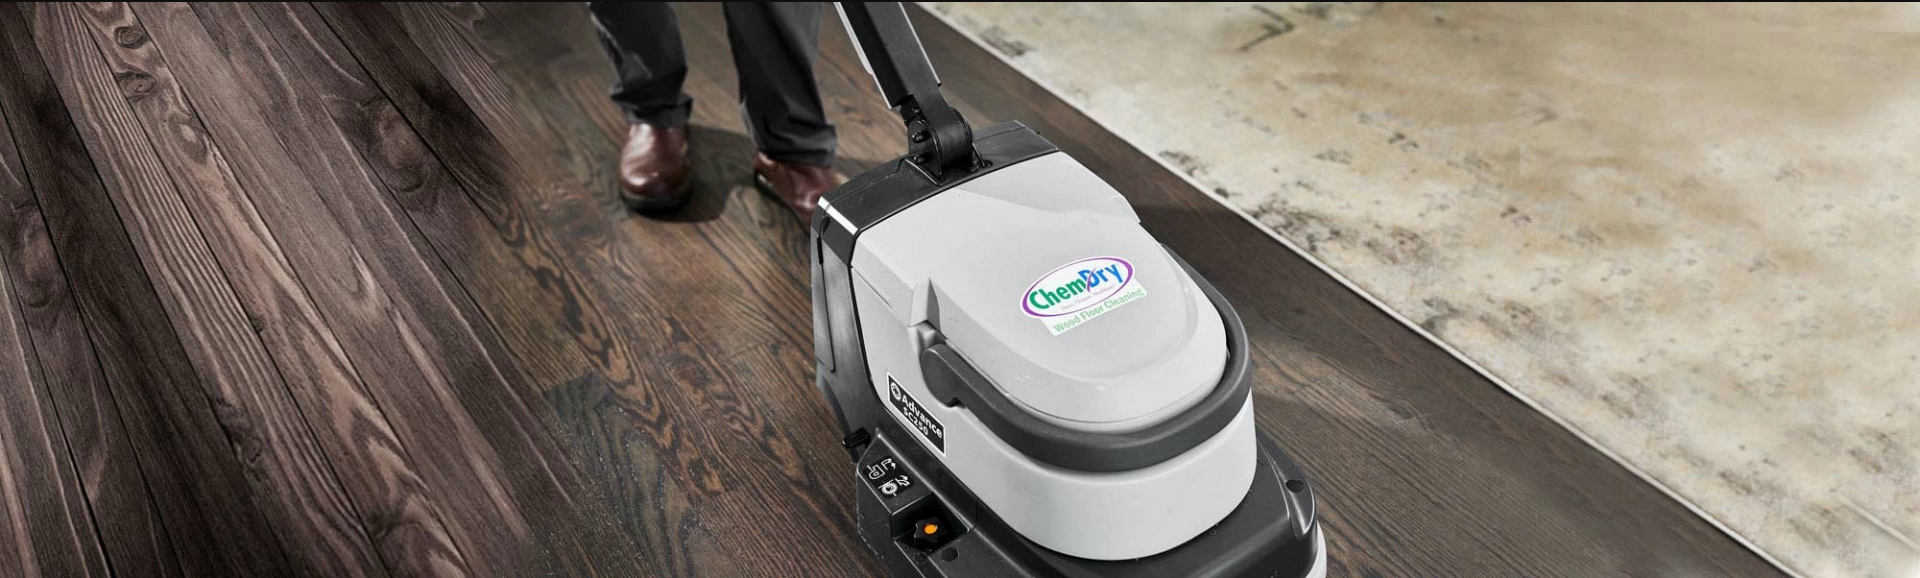 Hampton's Chem-Dry provides revolutionary wood floor cleaning in the Hannibal & Quincy areas.